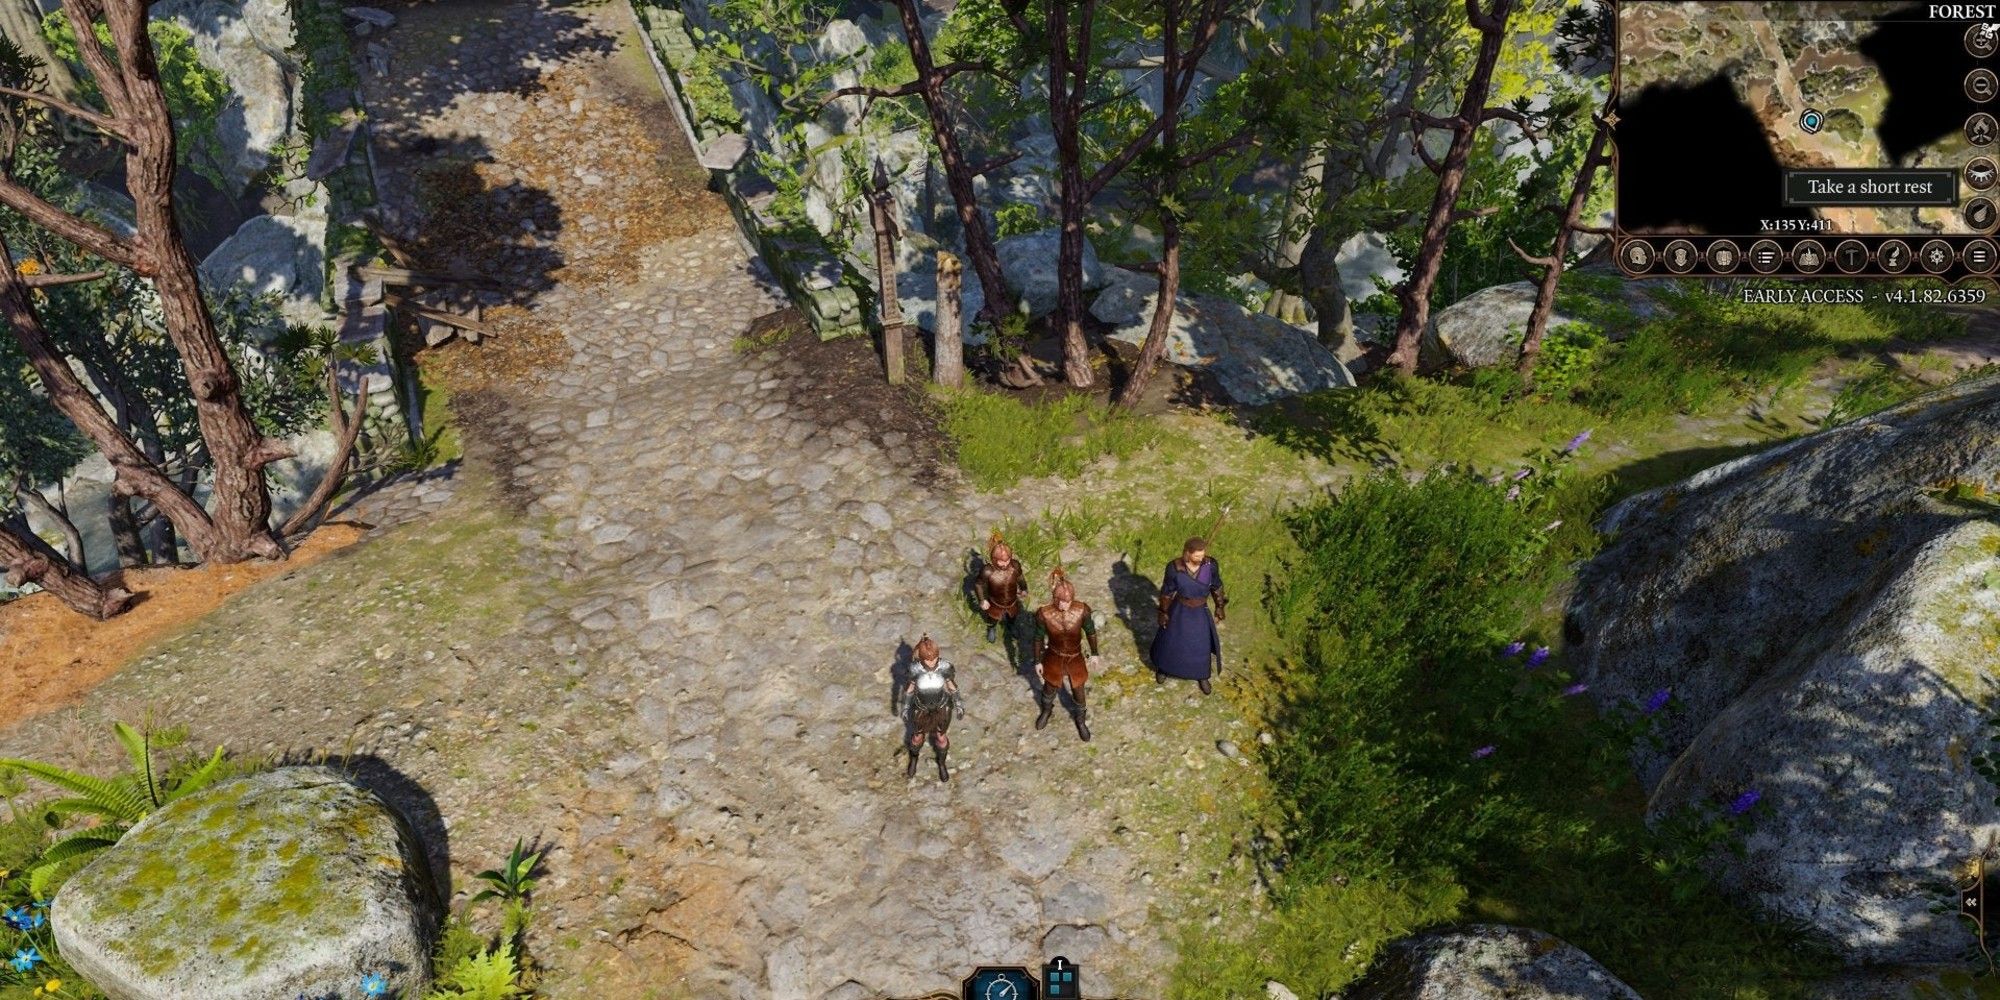 Players use the minimap to take a short rest in Baldur's Gate 3